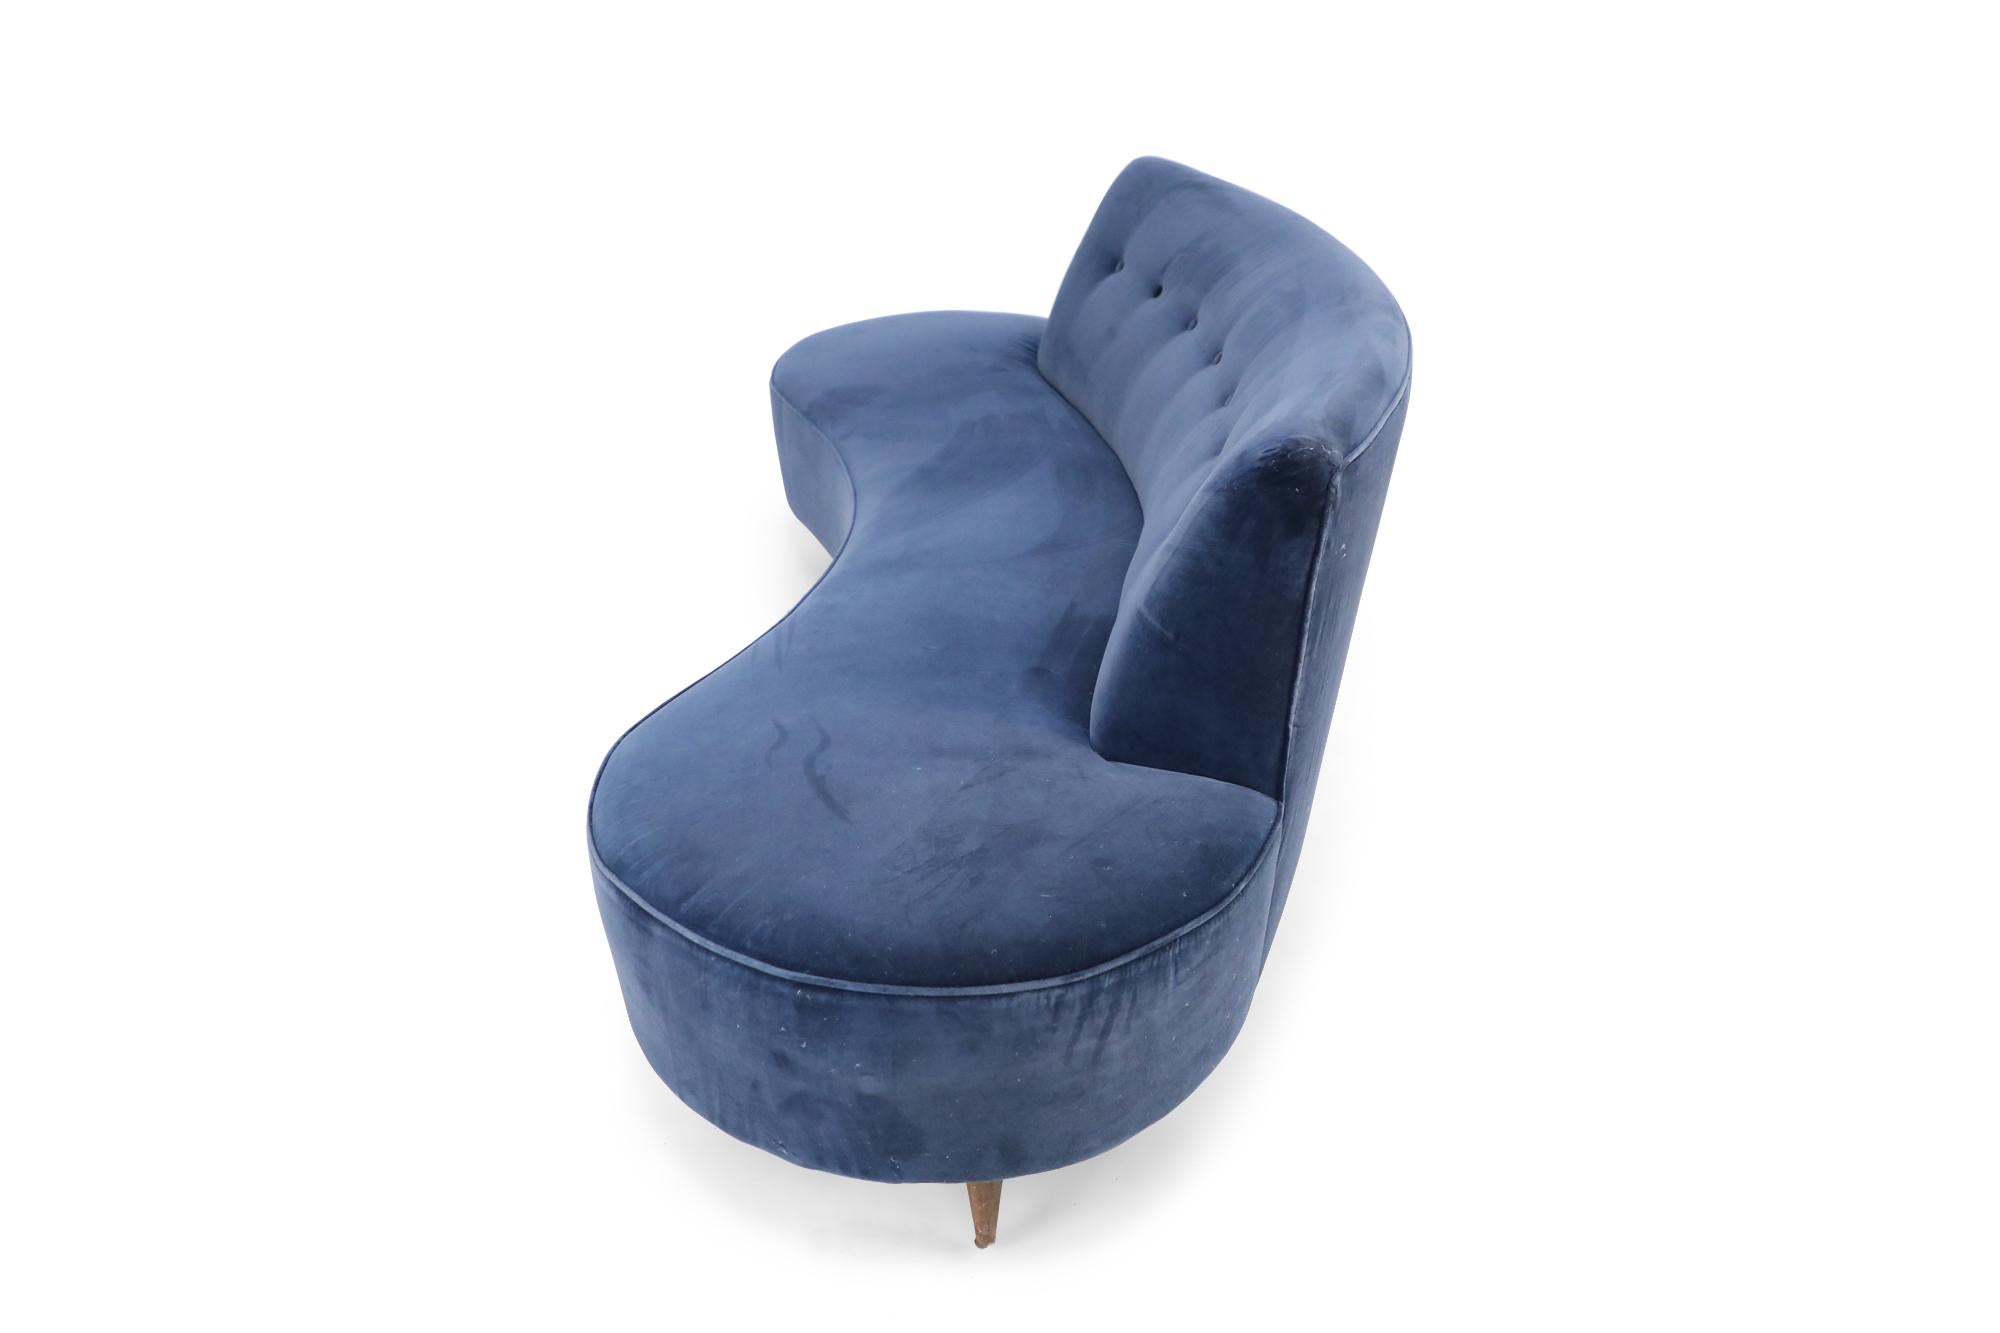 American mid-century style sofa with abstract shape, navy blue Colefax and Fowler velvet upholstery, and button tufted backrest in the style of Vladimir Kagan.